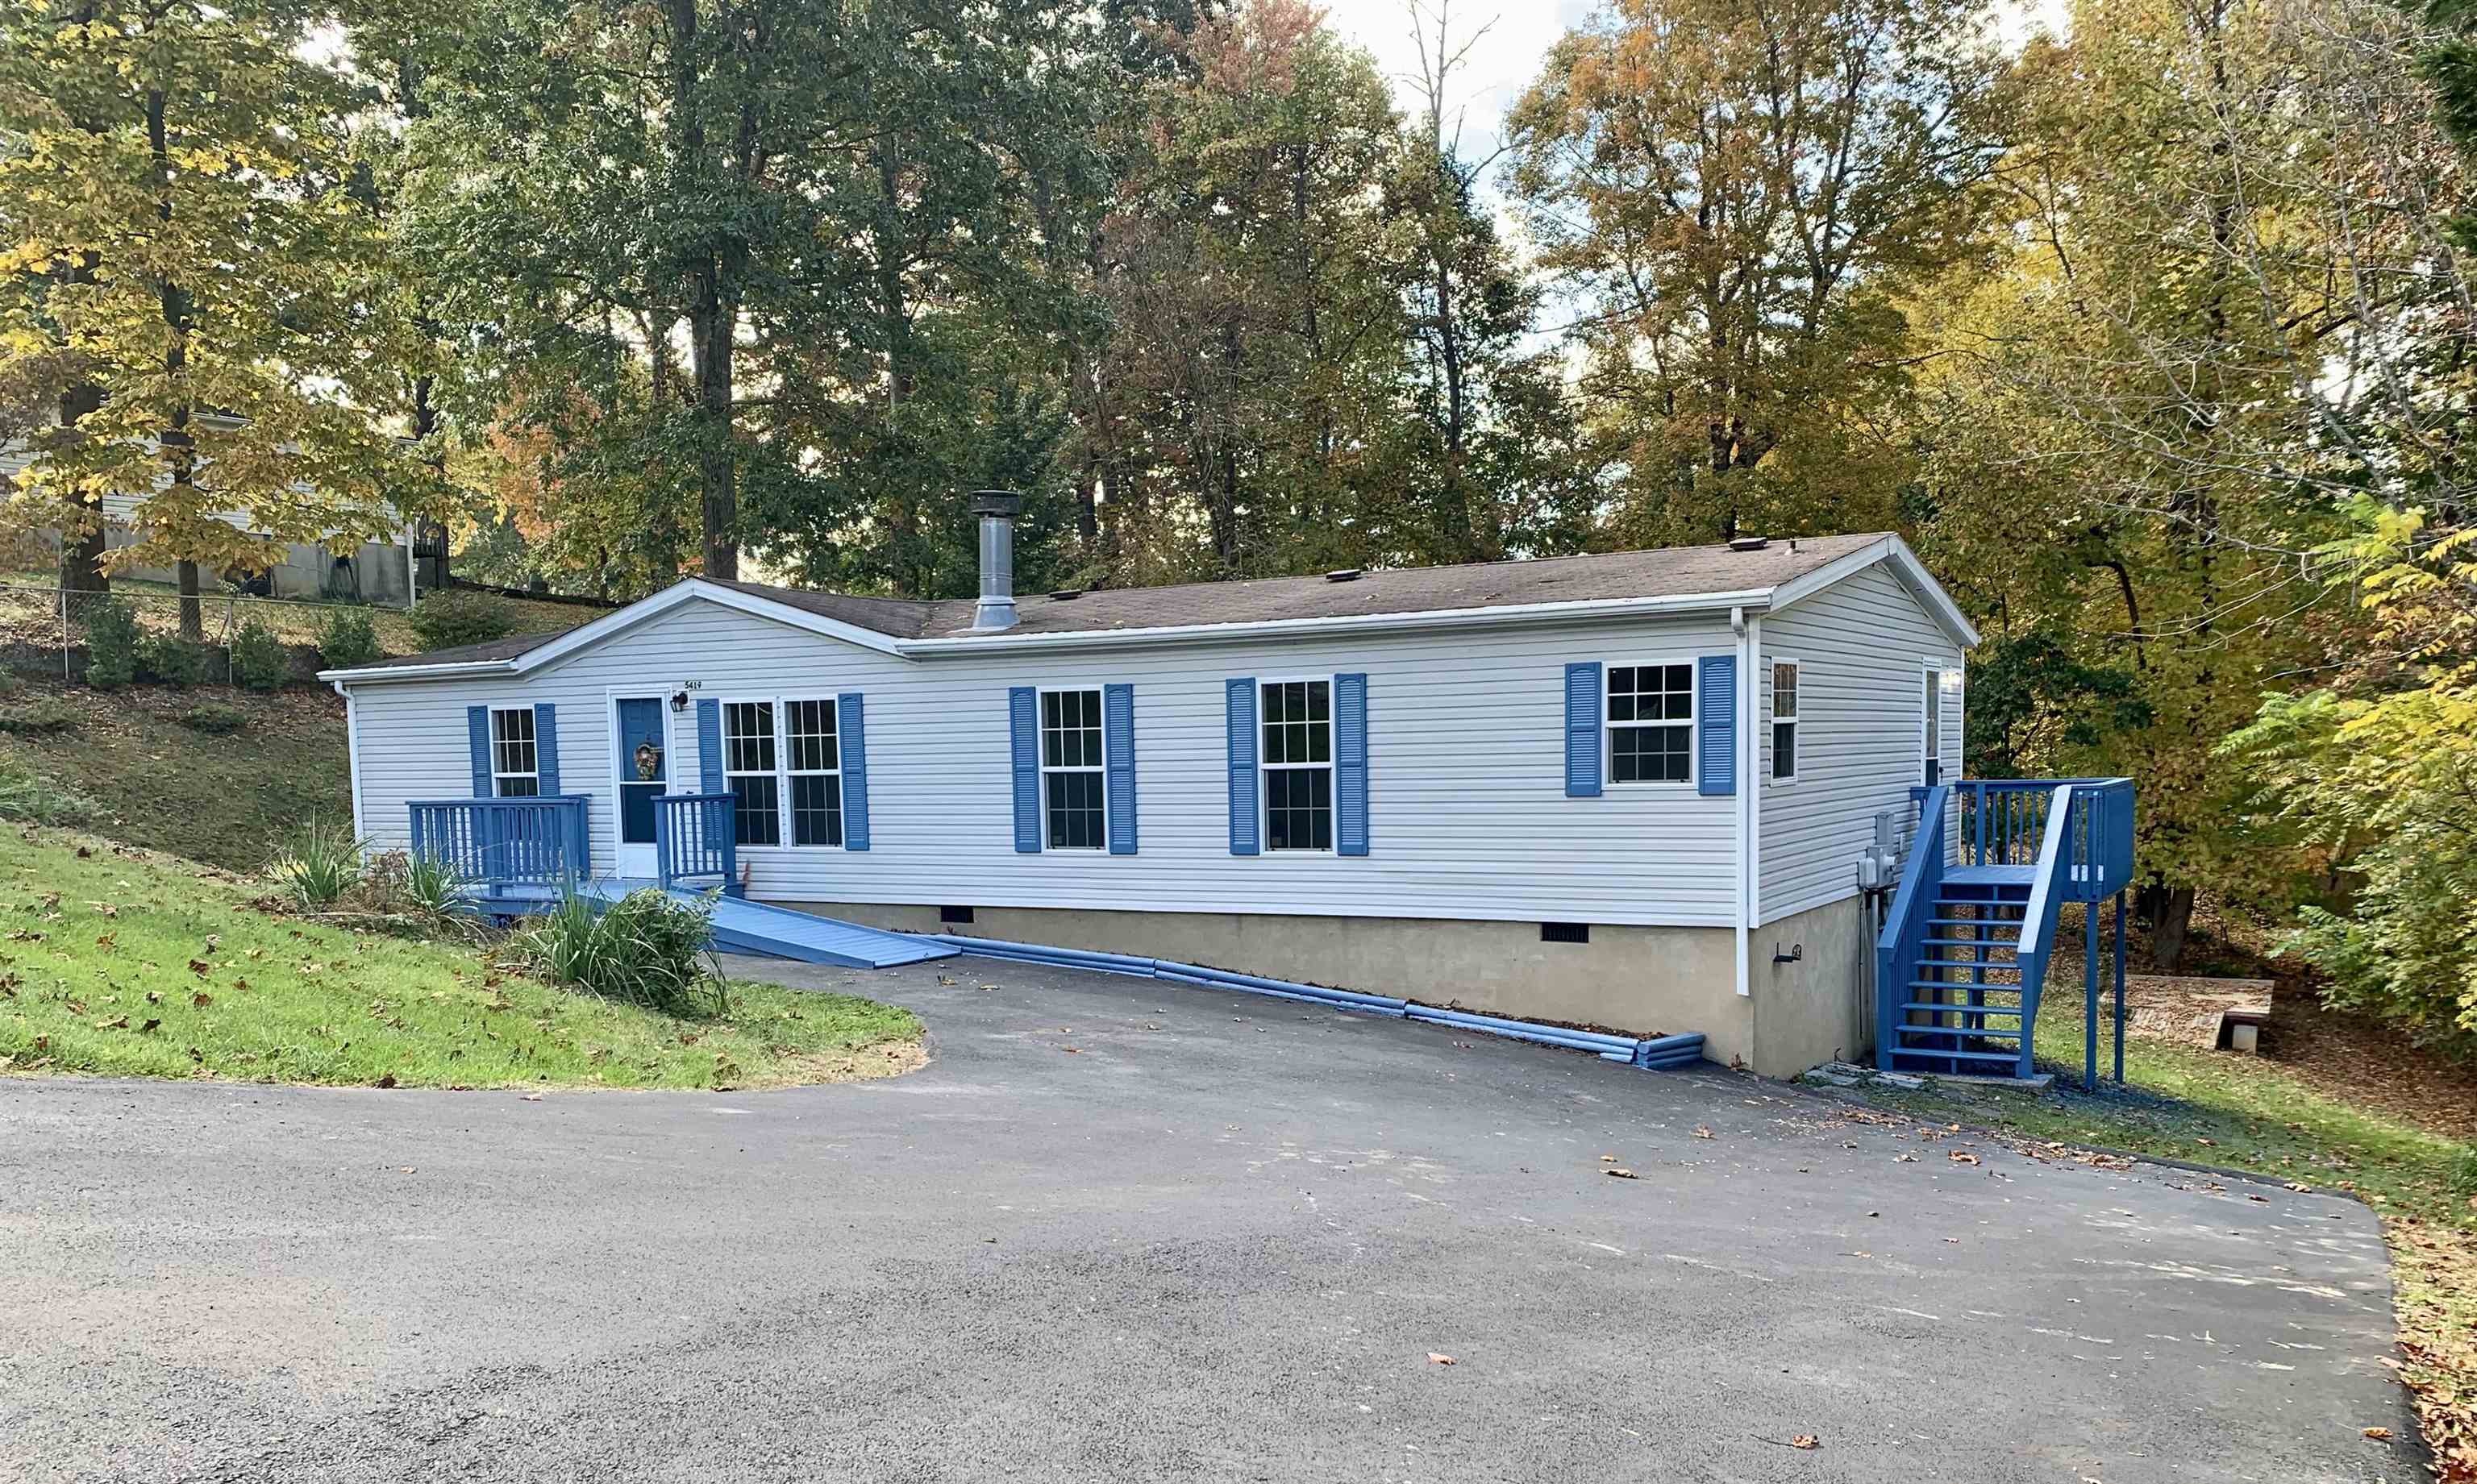 Newly remodeled home on a permanent foundation! This 3 Bed 2 bath beauty has new cabinets, countertops, appliances, tub/showers, floors, paint, and more. Located in a peaceful neighborhood with paved road and driveway. Home is only 15 minutes from Claytor Lake. The yard offers a private wooded setting to relax and enjoy. Storage shed in back. There is a large deck off of the kitchen, deck and stairs on side of home, and the front porch has a ramp. Meticulous craftsmanship throughout to save you from future projects. Home is currently being RENTED until Nov. 30th, 2024.